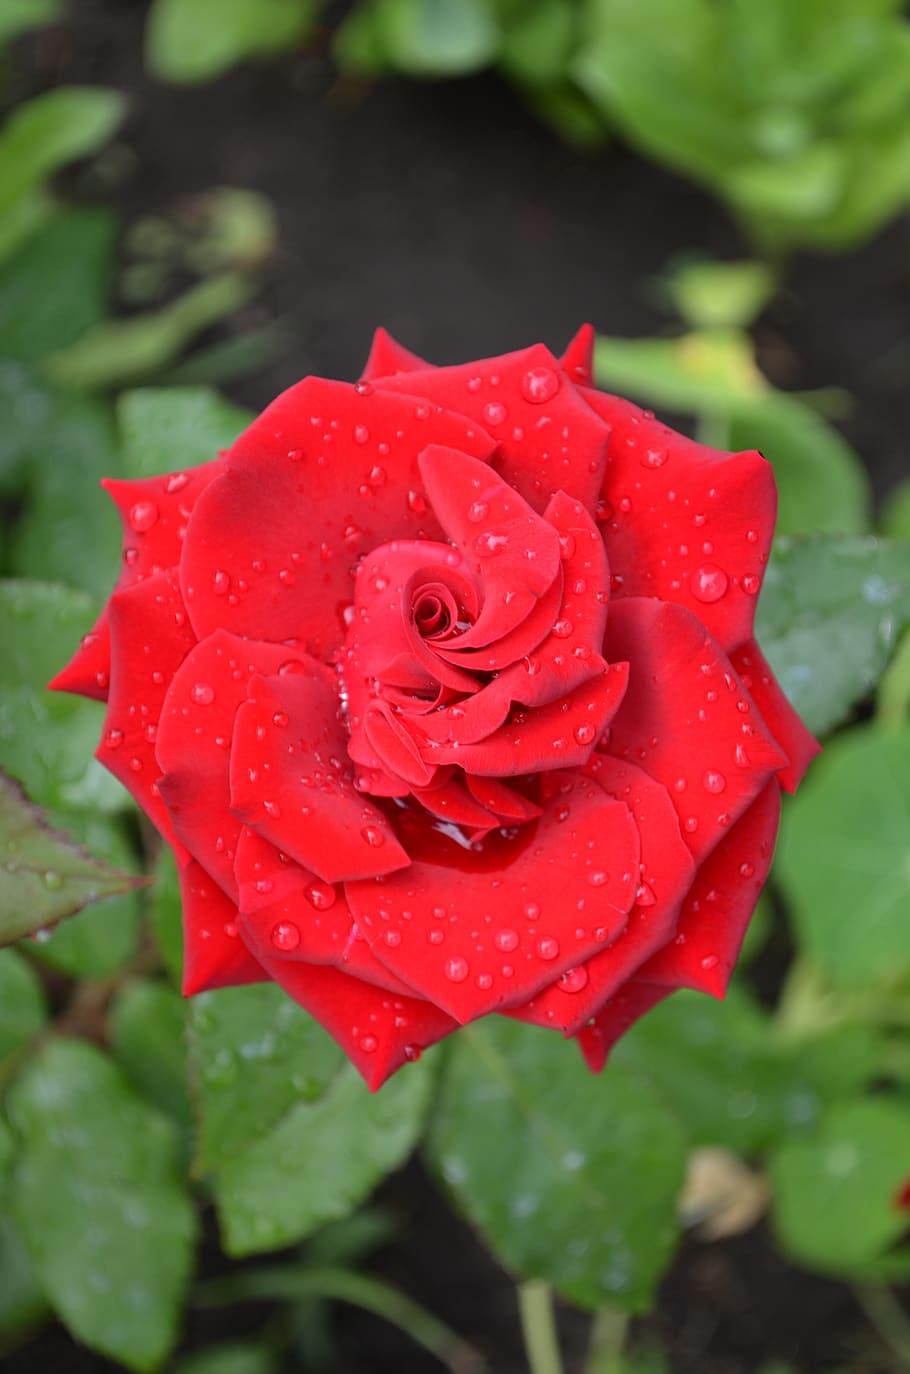 rose, red rose, red, flower, love, roses, beauty, petals, garden, nature